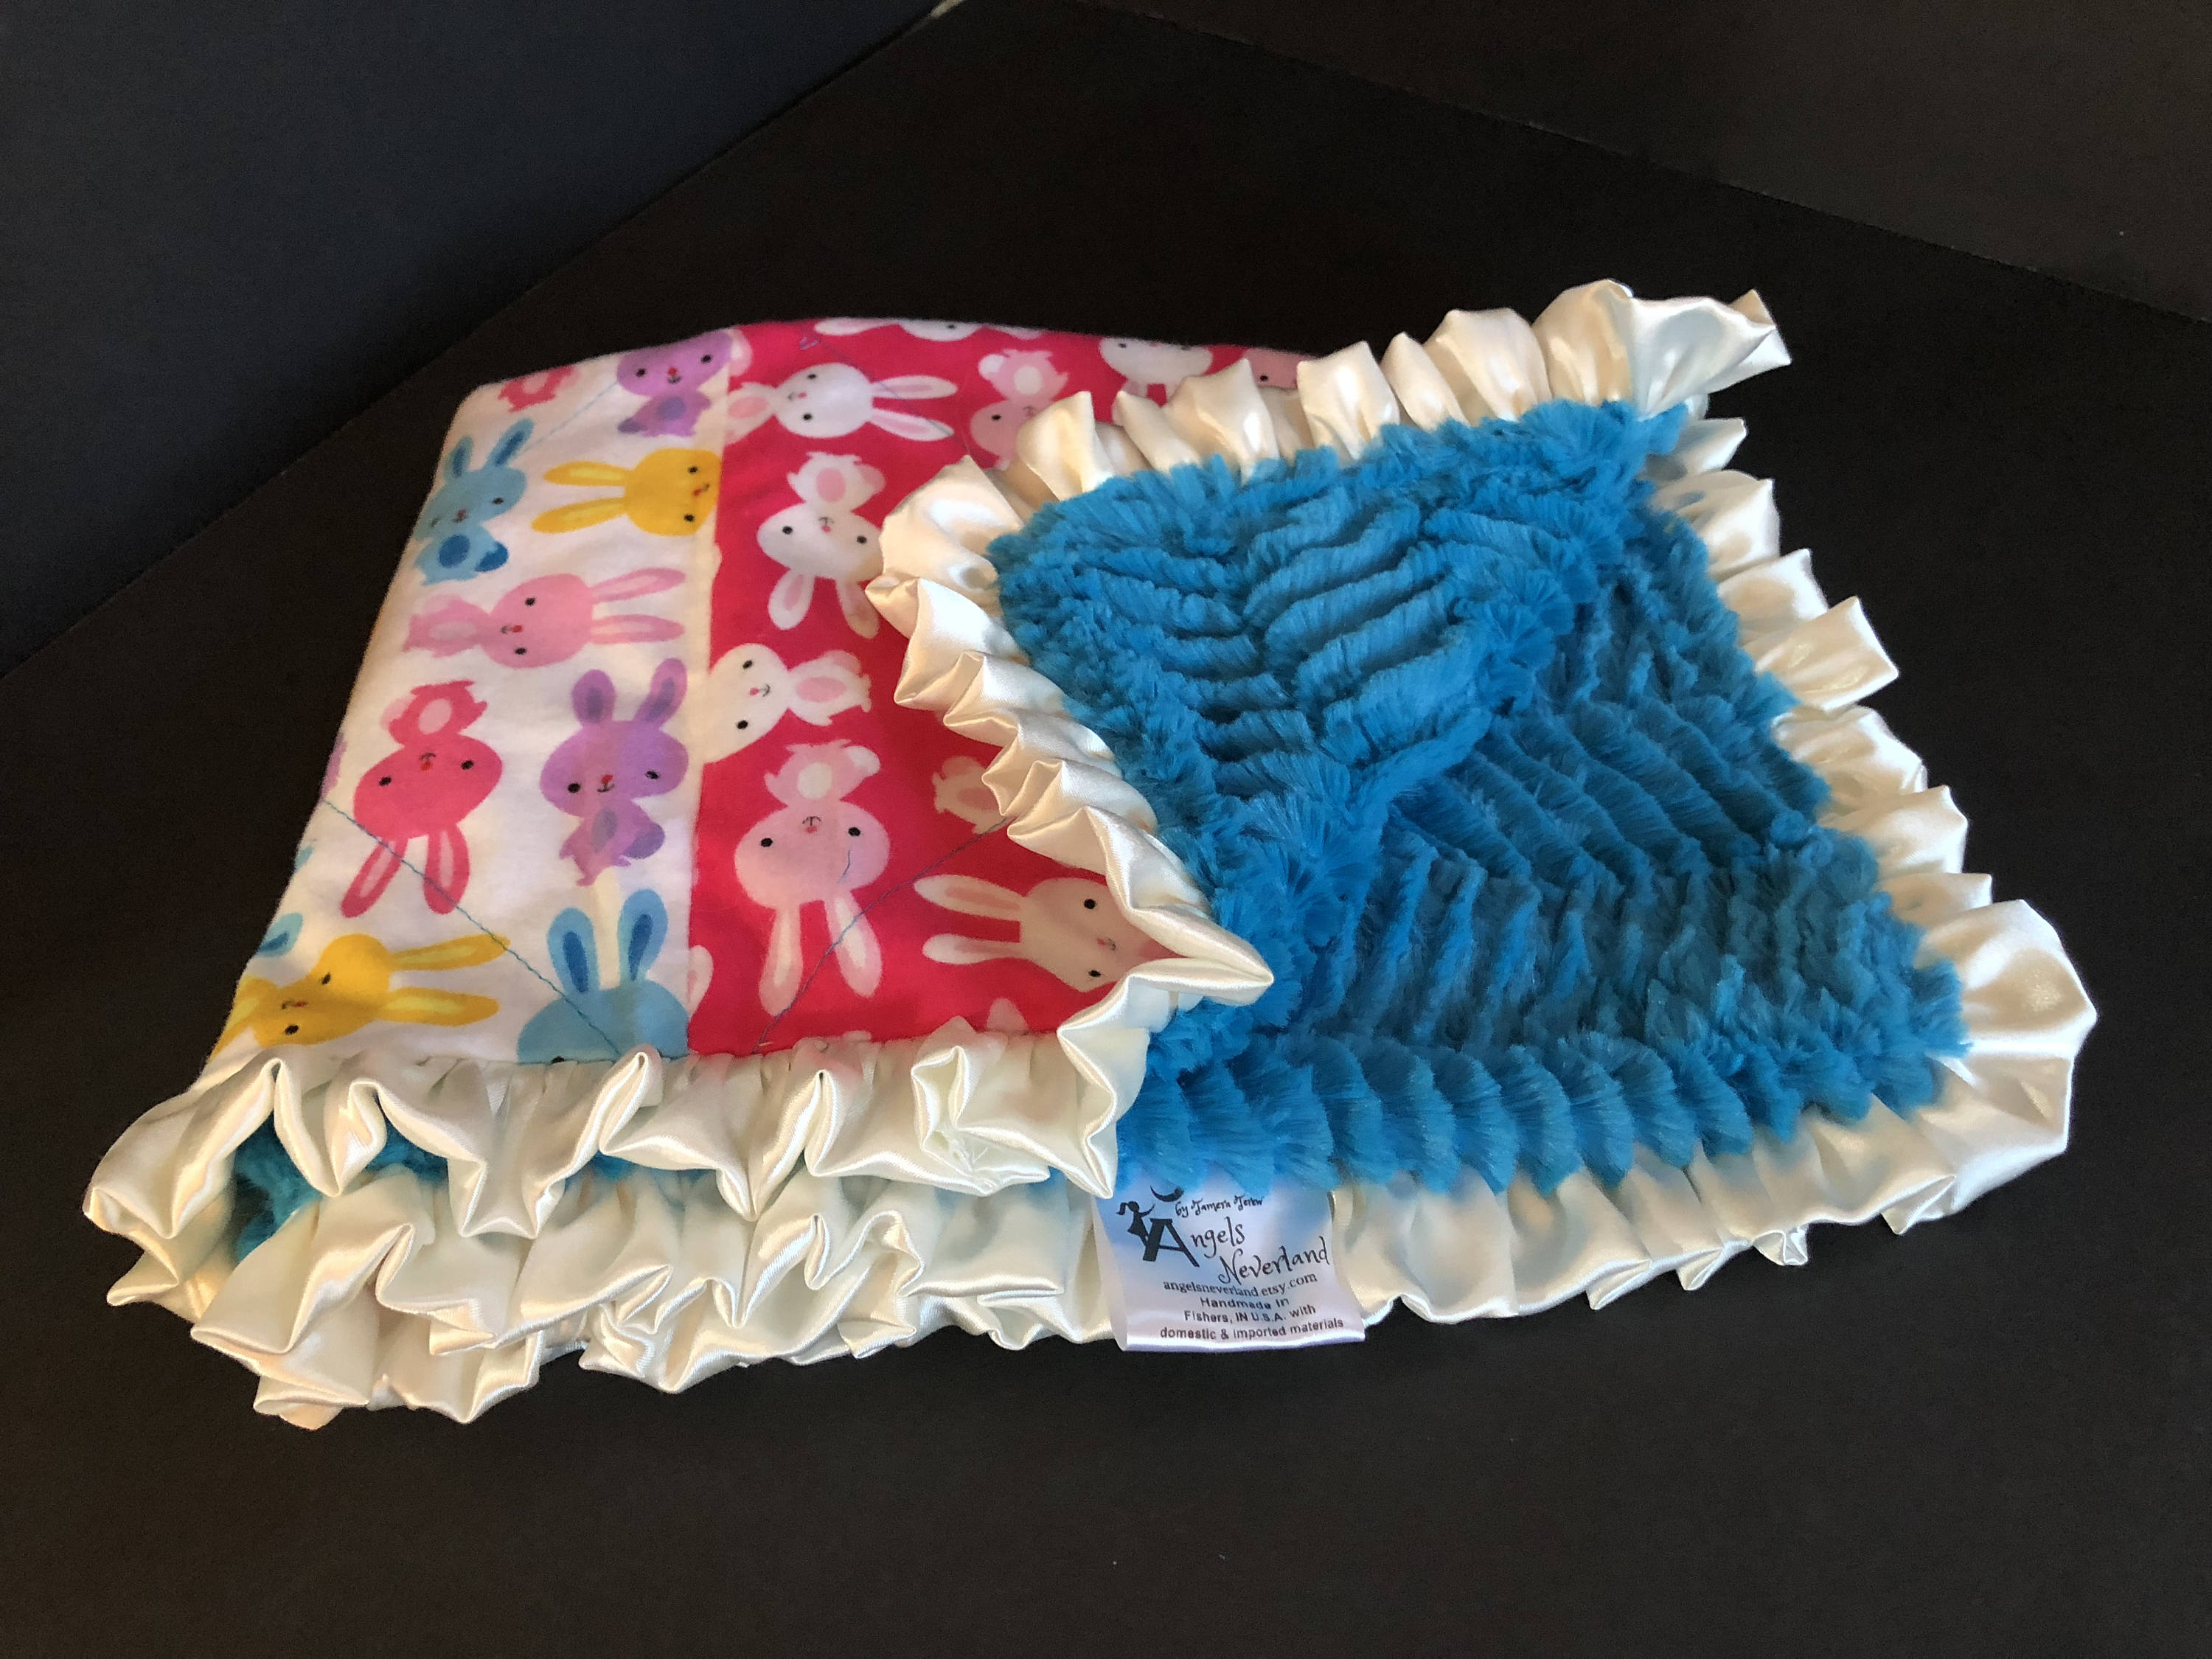 How to Make a No-Sew Baby Blanket with Minky Fabric - Cutesy Crafts